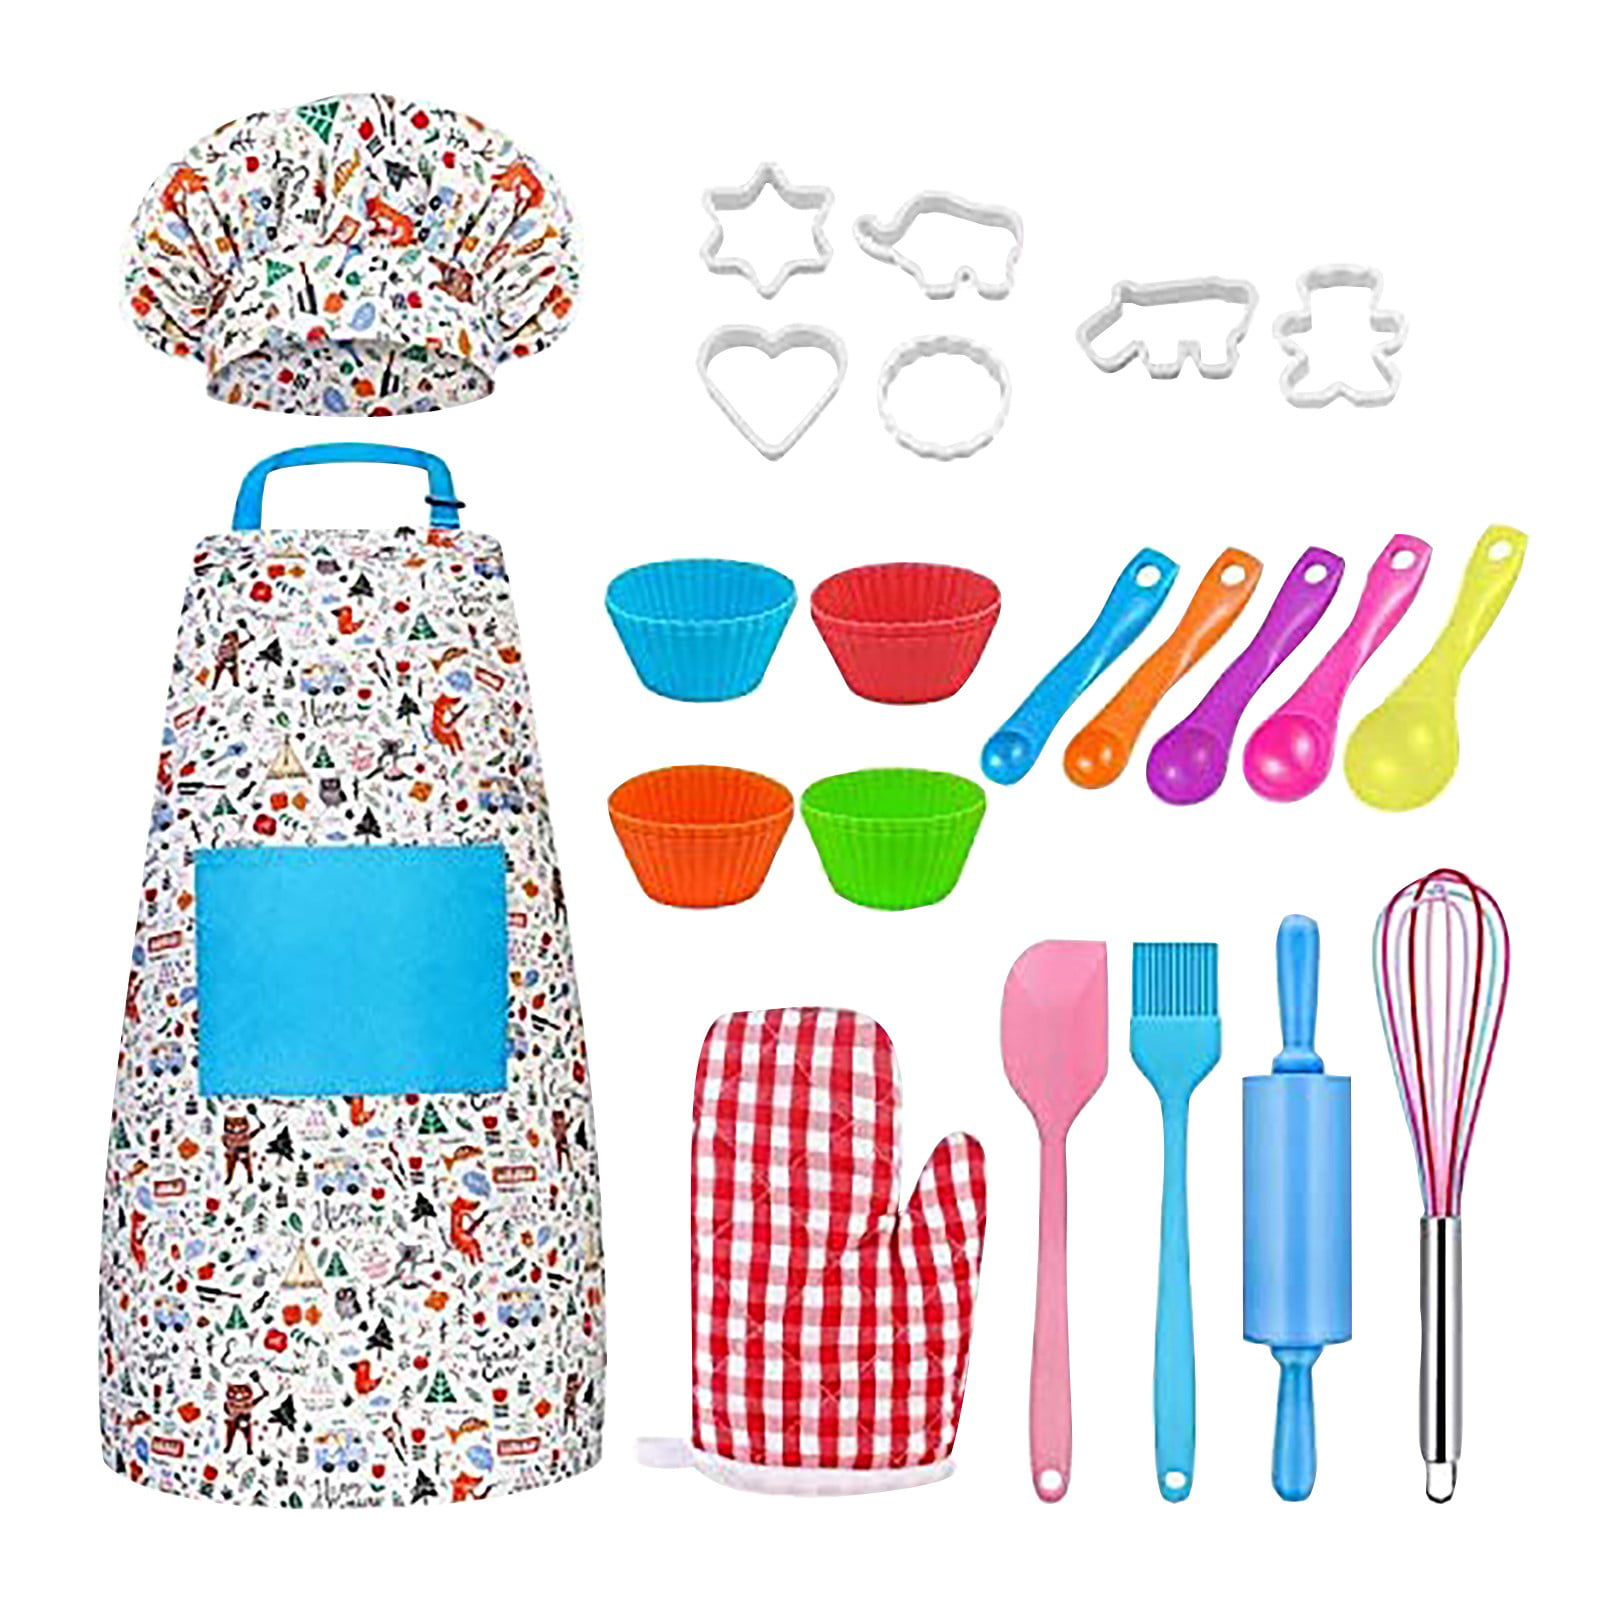 Kids Apron Cooking & Baking Set with Real Utensils Kids Chef Hat and Apron Set 